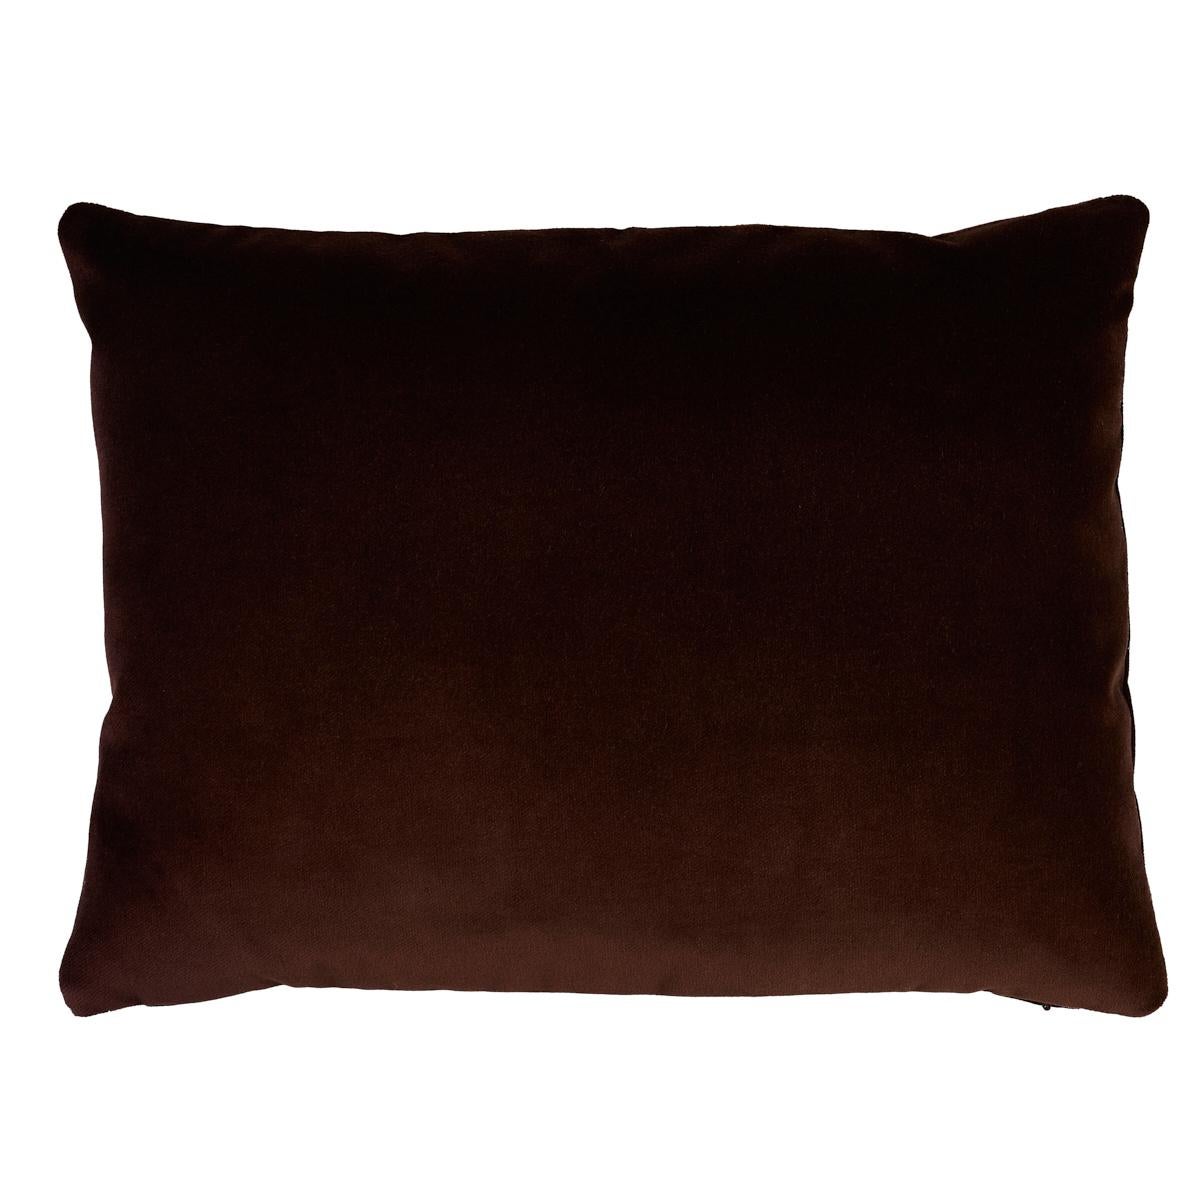 This pillow features Marion Velvet Tape with a knife edge finish. A scrolling leaf pattern in jacquard cut velvet gives this champagne-colored accessory a luster that's positively luxurious and absolutely chic. Body of pillow is Rocky Performance